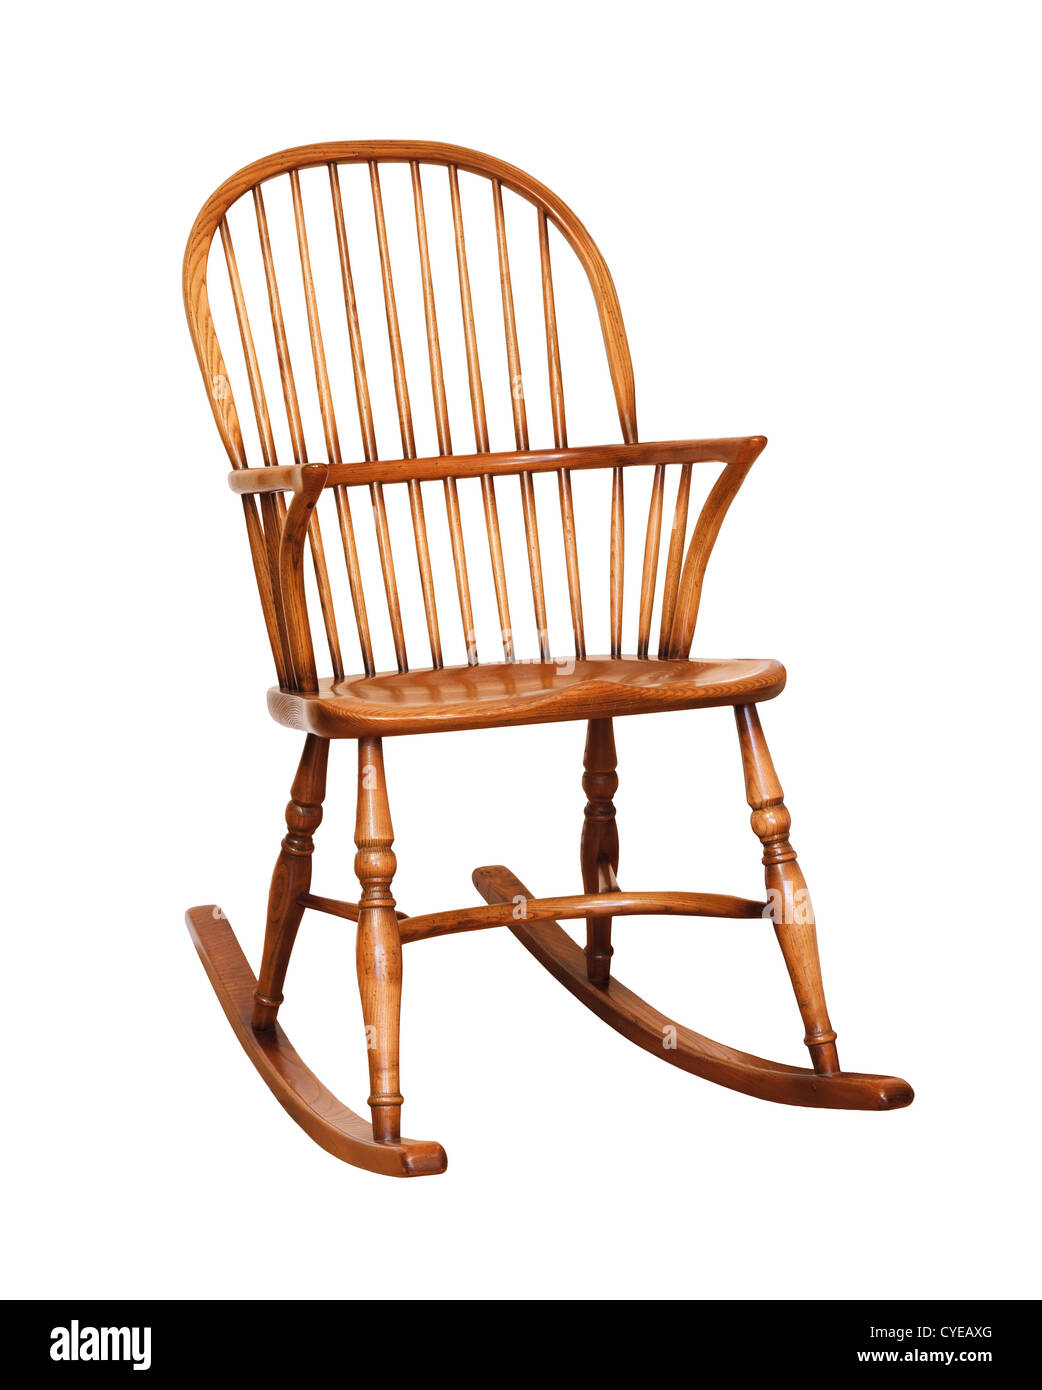 Wooden rocking chair isolated against a white background with clipping path Stock Photo